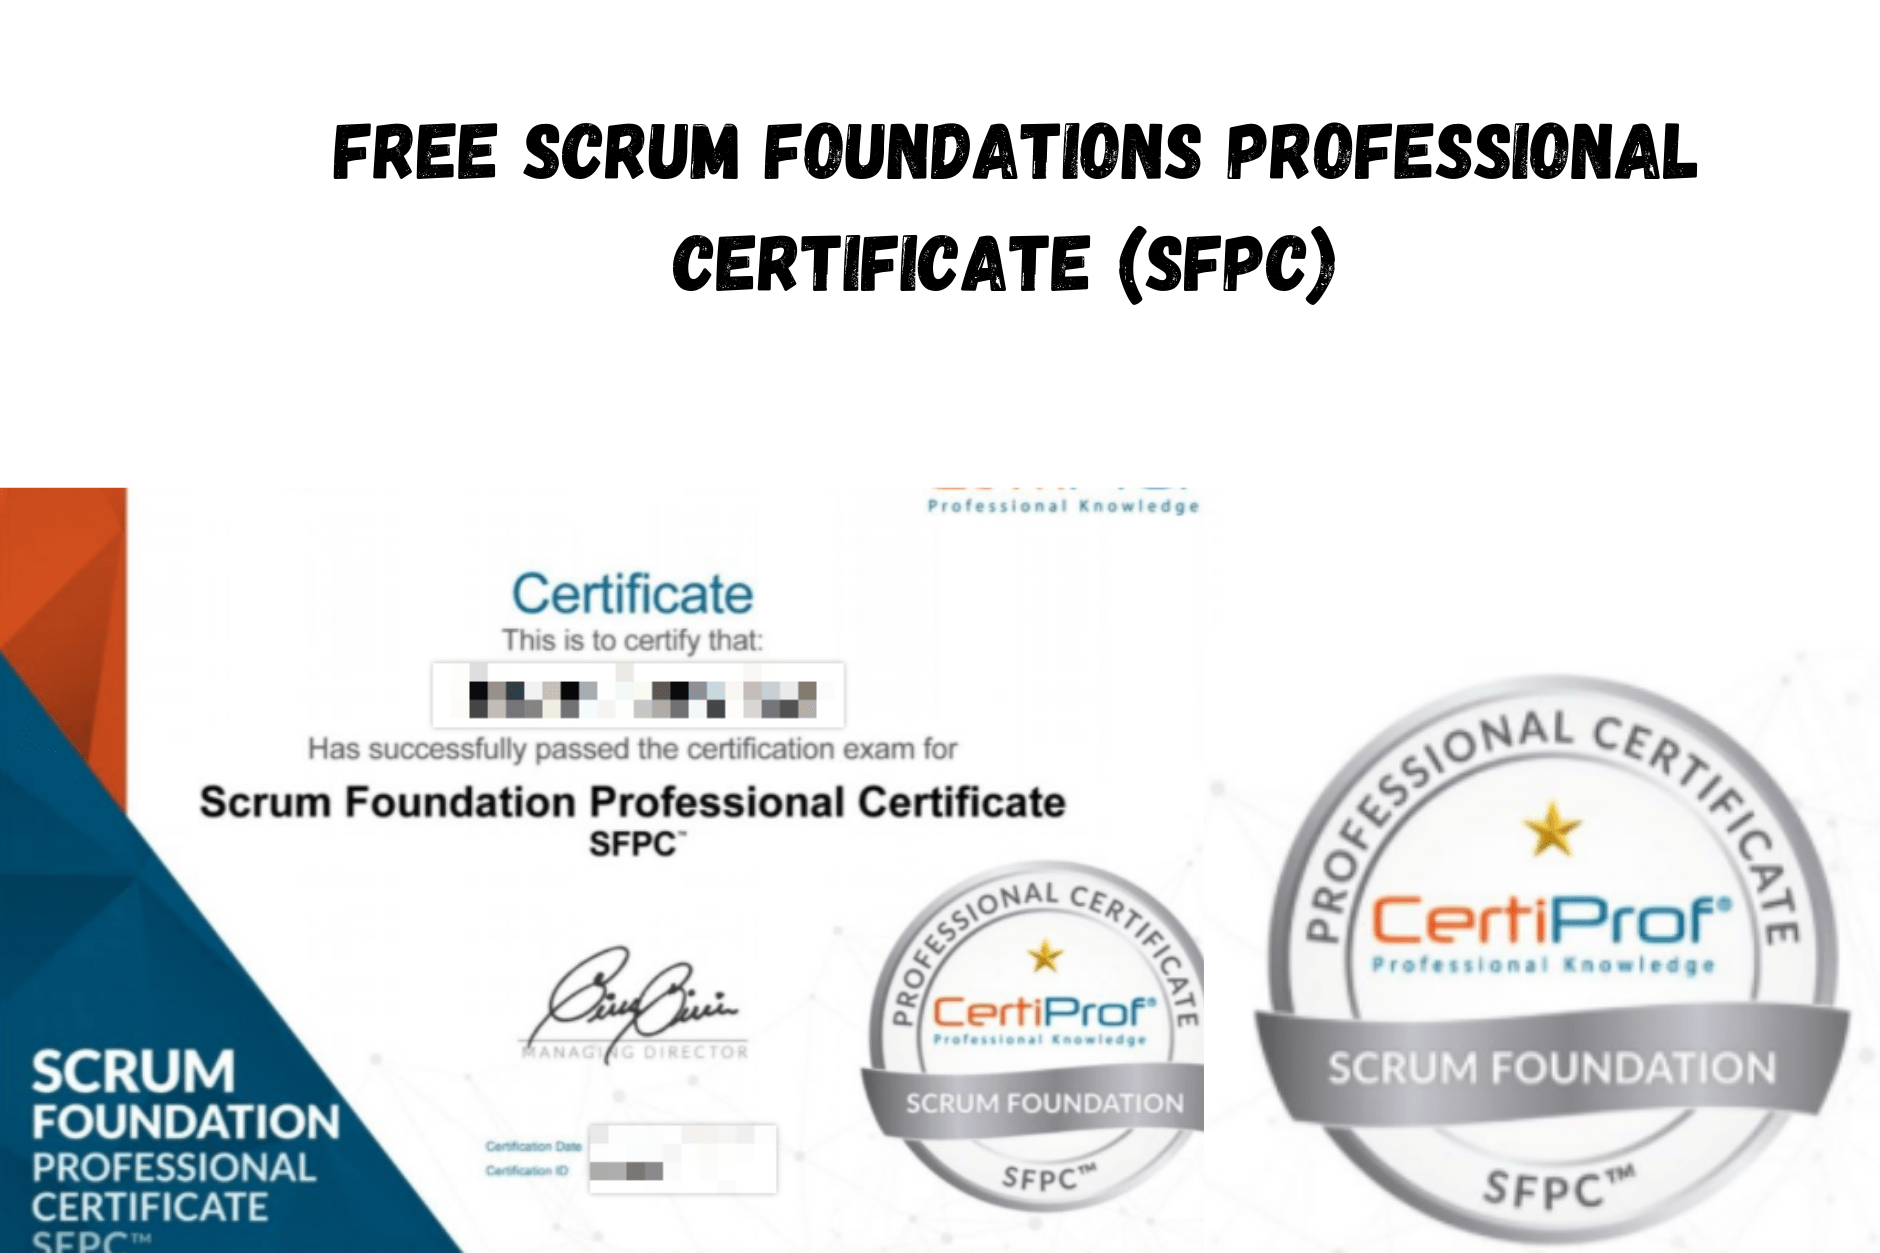 Free Scrum foundation professional certificate questions and answers